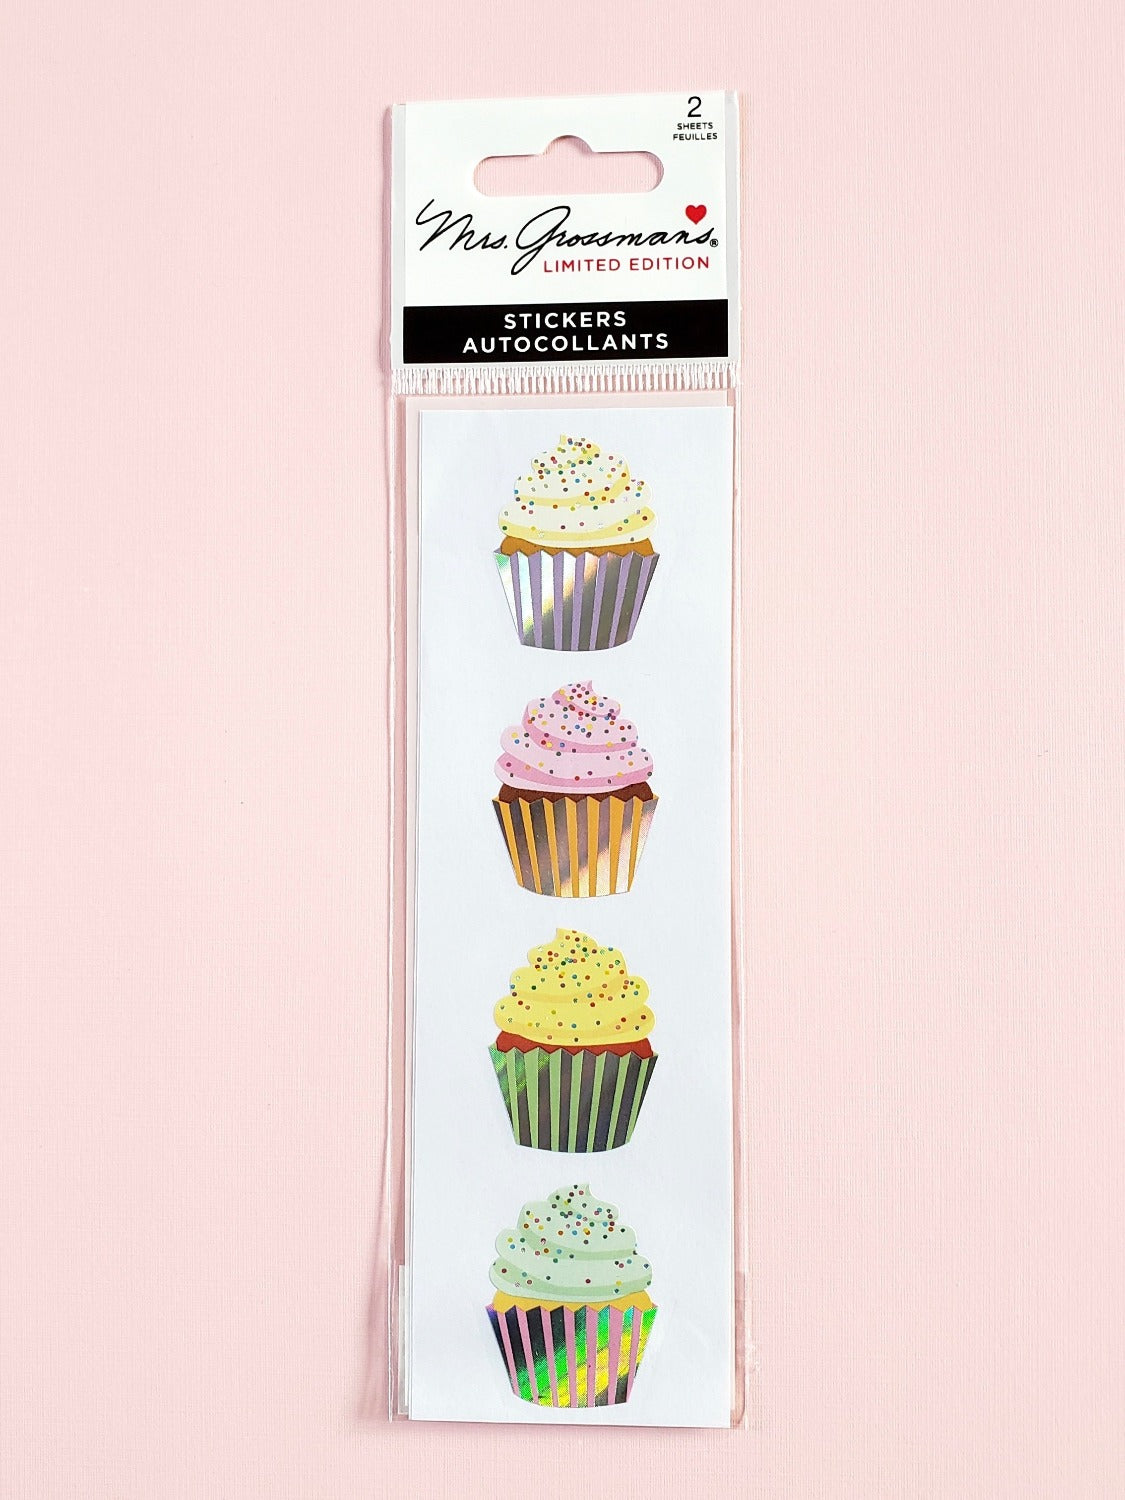 Mrs Grossman's limited edition pastel cupcake stickers